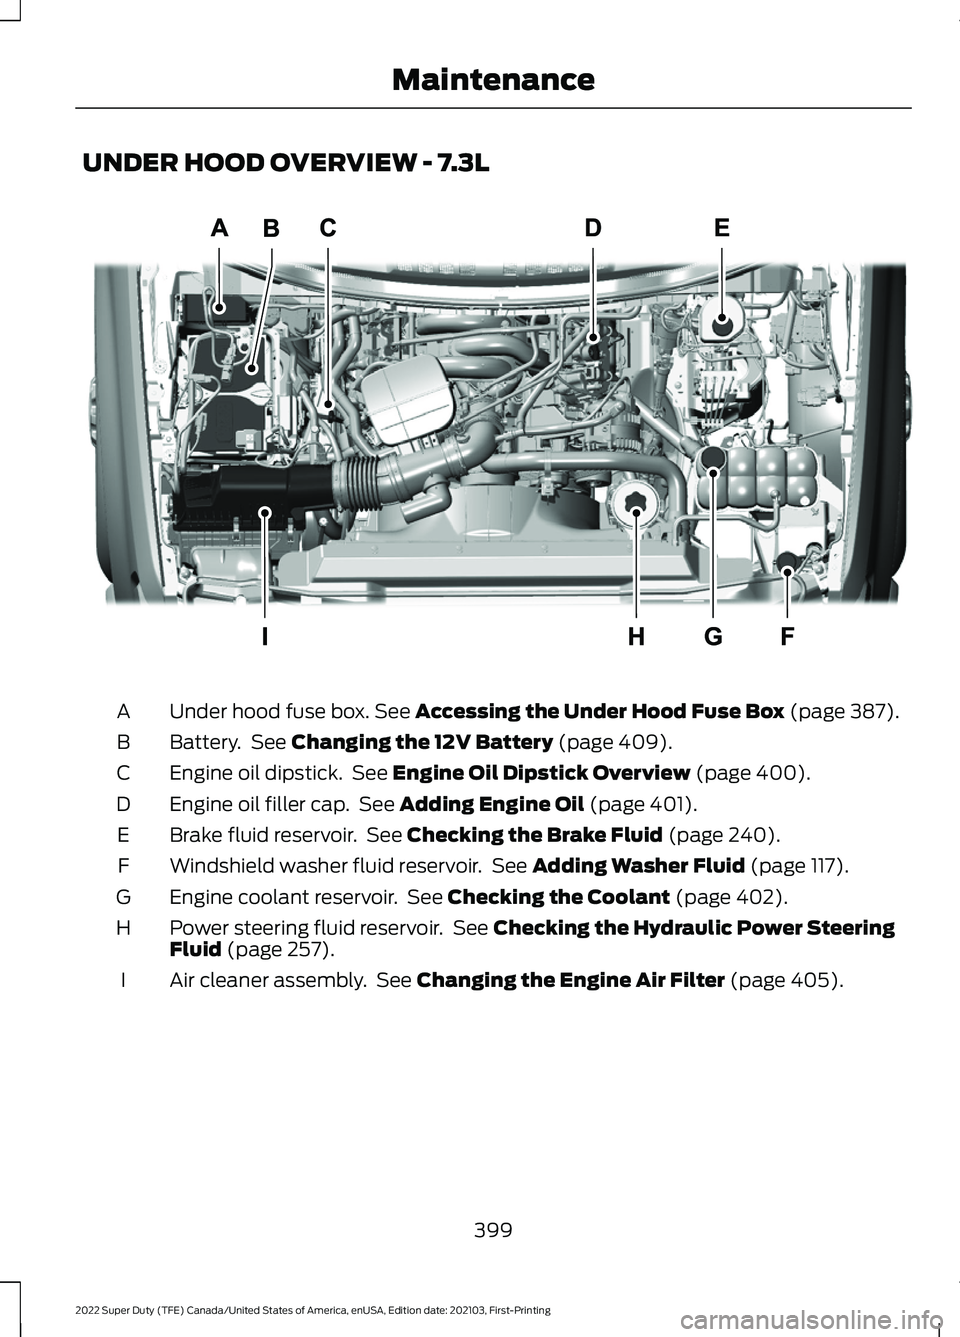 FORD F-350 2022  Owners Manual UNDER HOOD OVERVIEW - 7.3L
Under hood fuse box. See Accessing the Under Hood Fuse Box (page 387).
A
Battery.  See 
Changing the 12V Battery (page 409).
B
Engine oil dipstick.  See 
Engine Oil Dipstick